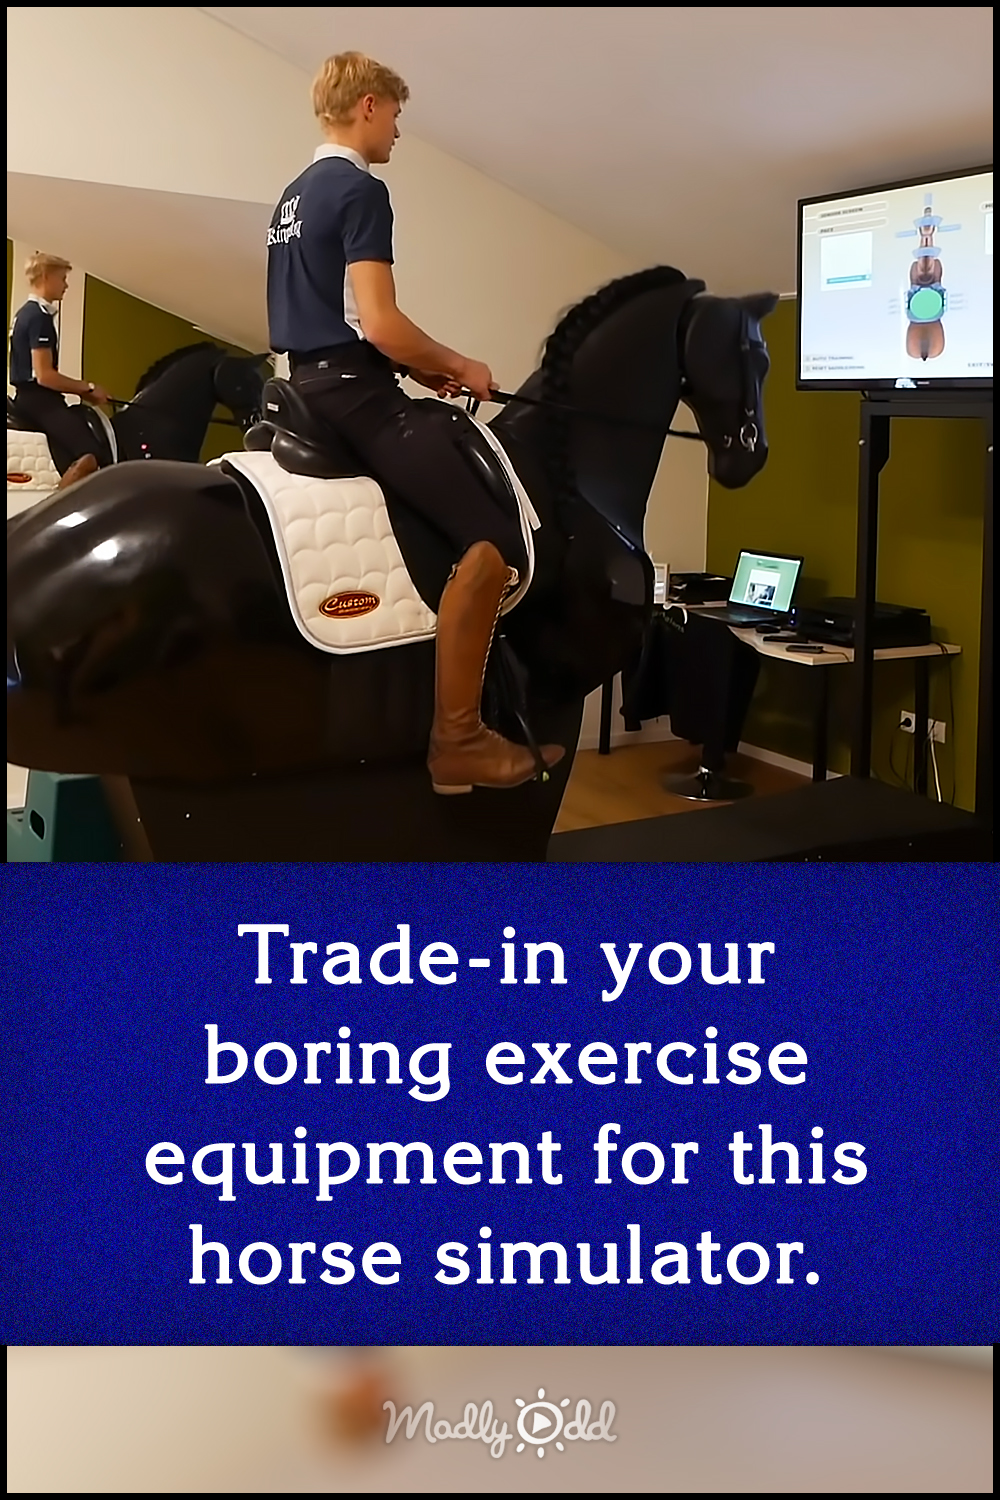 Trade-in your boring exercise equipment for this horse simulator